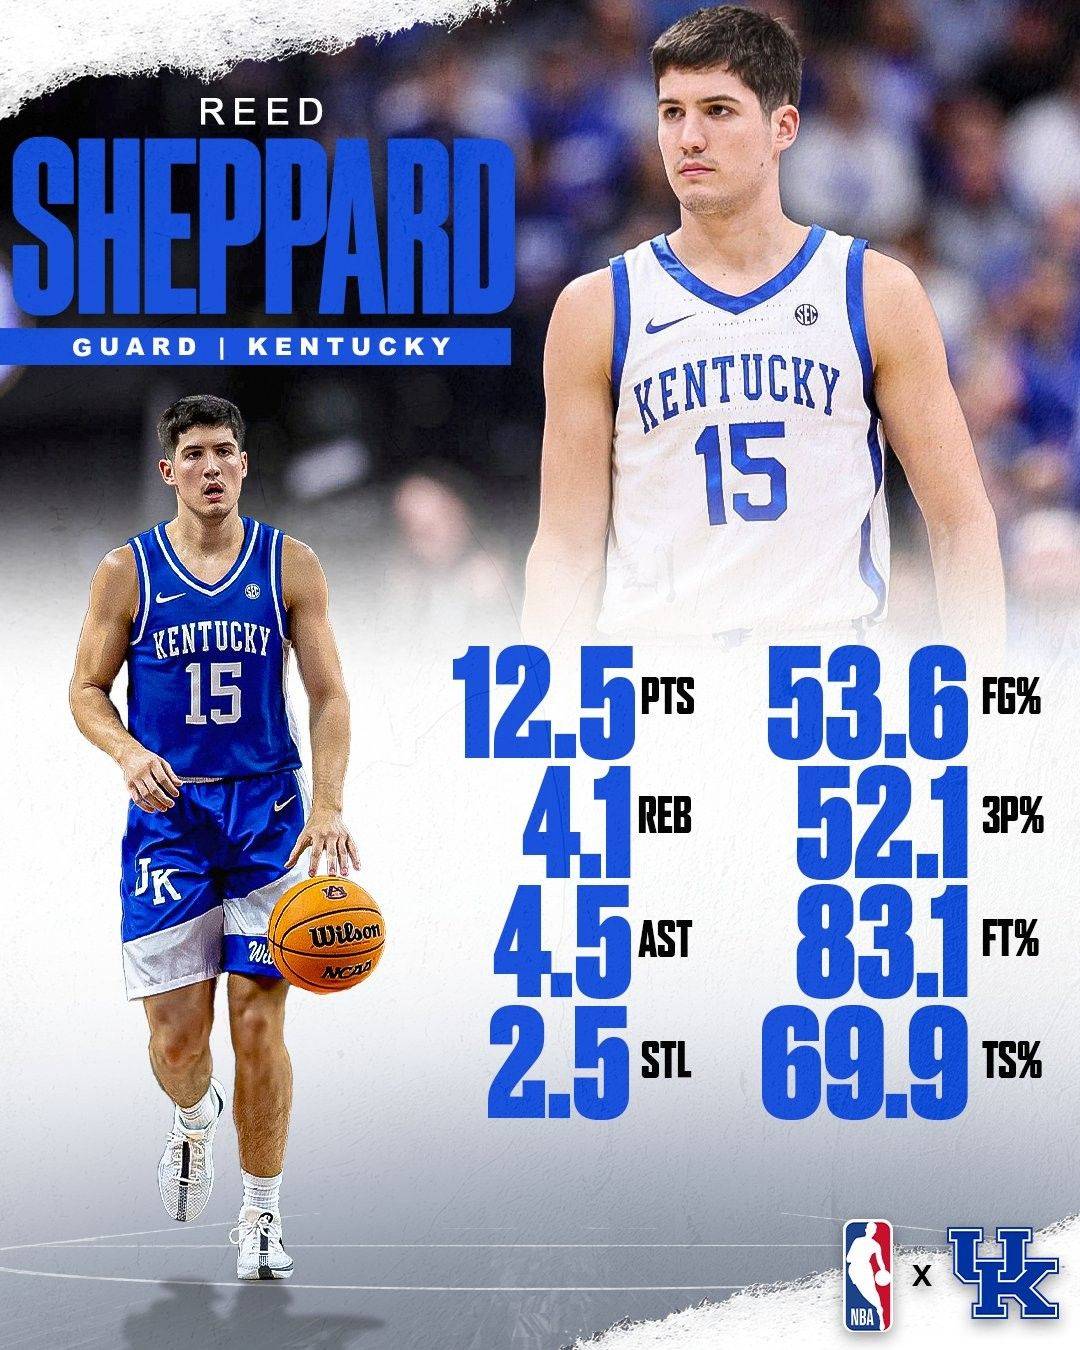 Newcomer Showcase: Top 3 Favorite! Kentucky Two-Way Guard with a %.521 Three-Point Percentage: Reed Sheppard